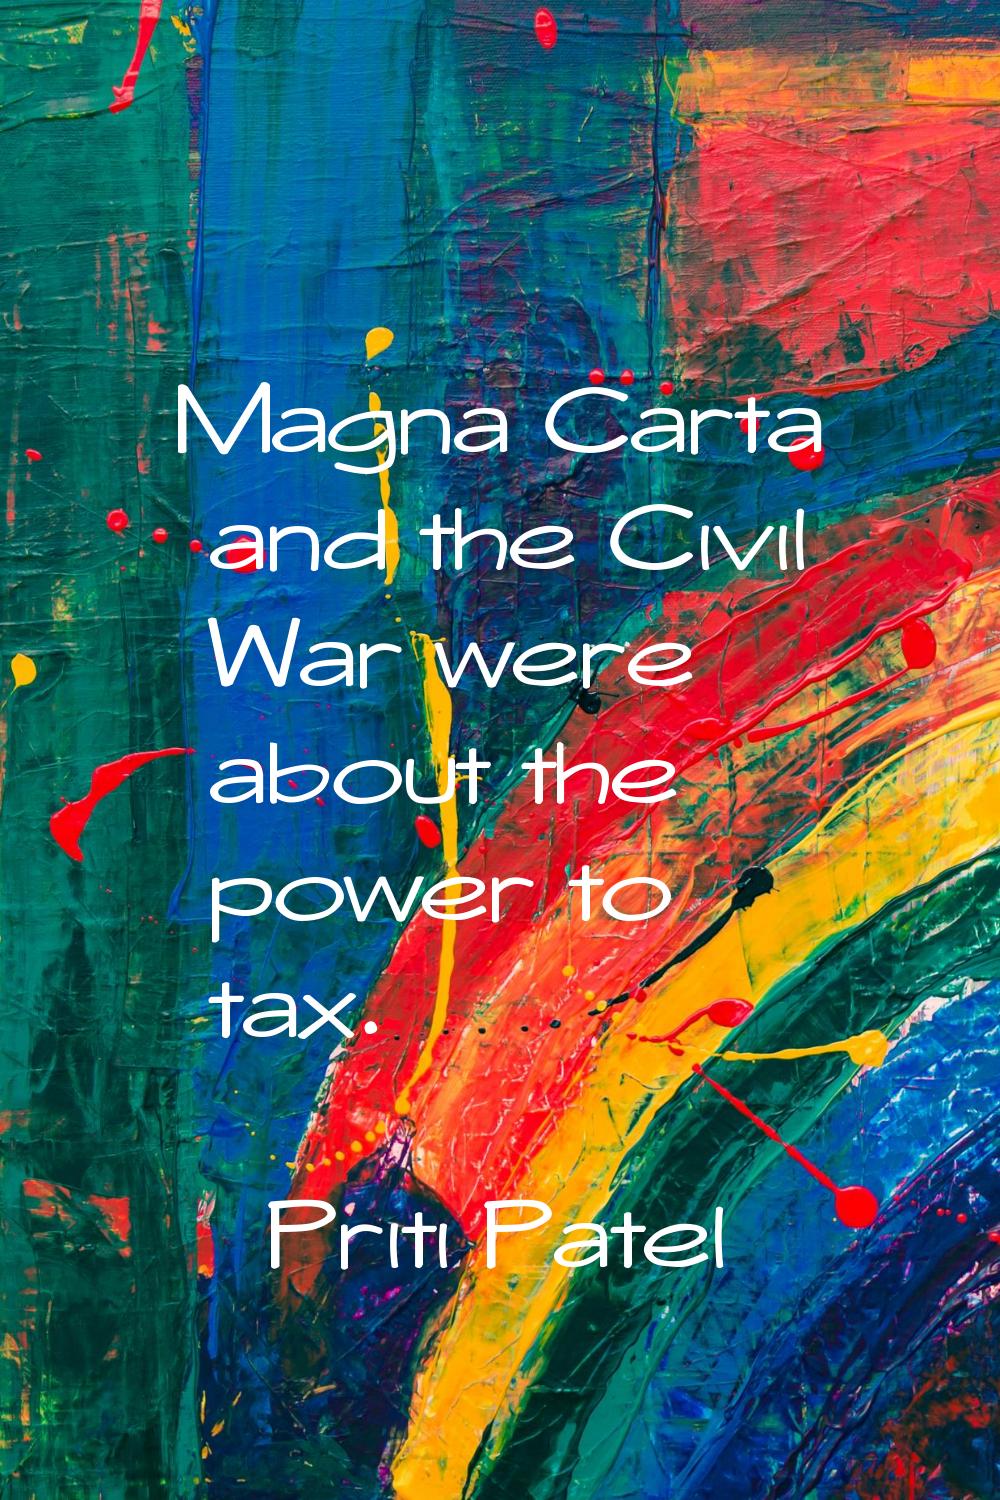 Magna Carta and the Civil War were about the power to tax.